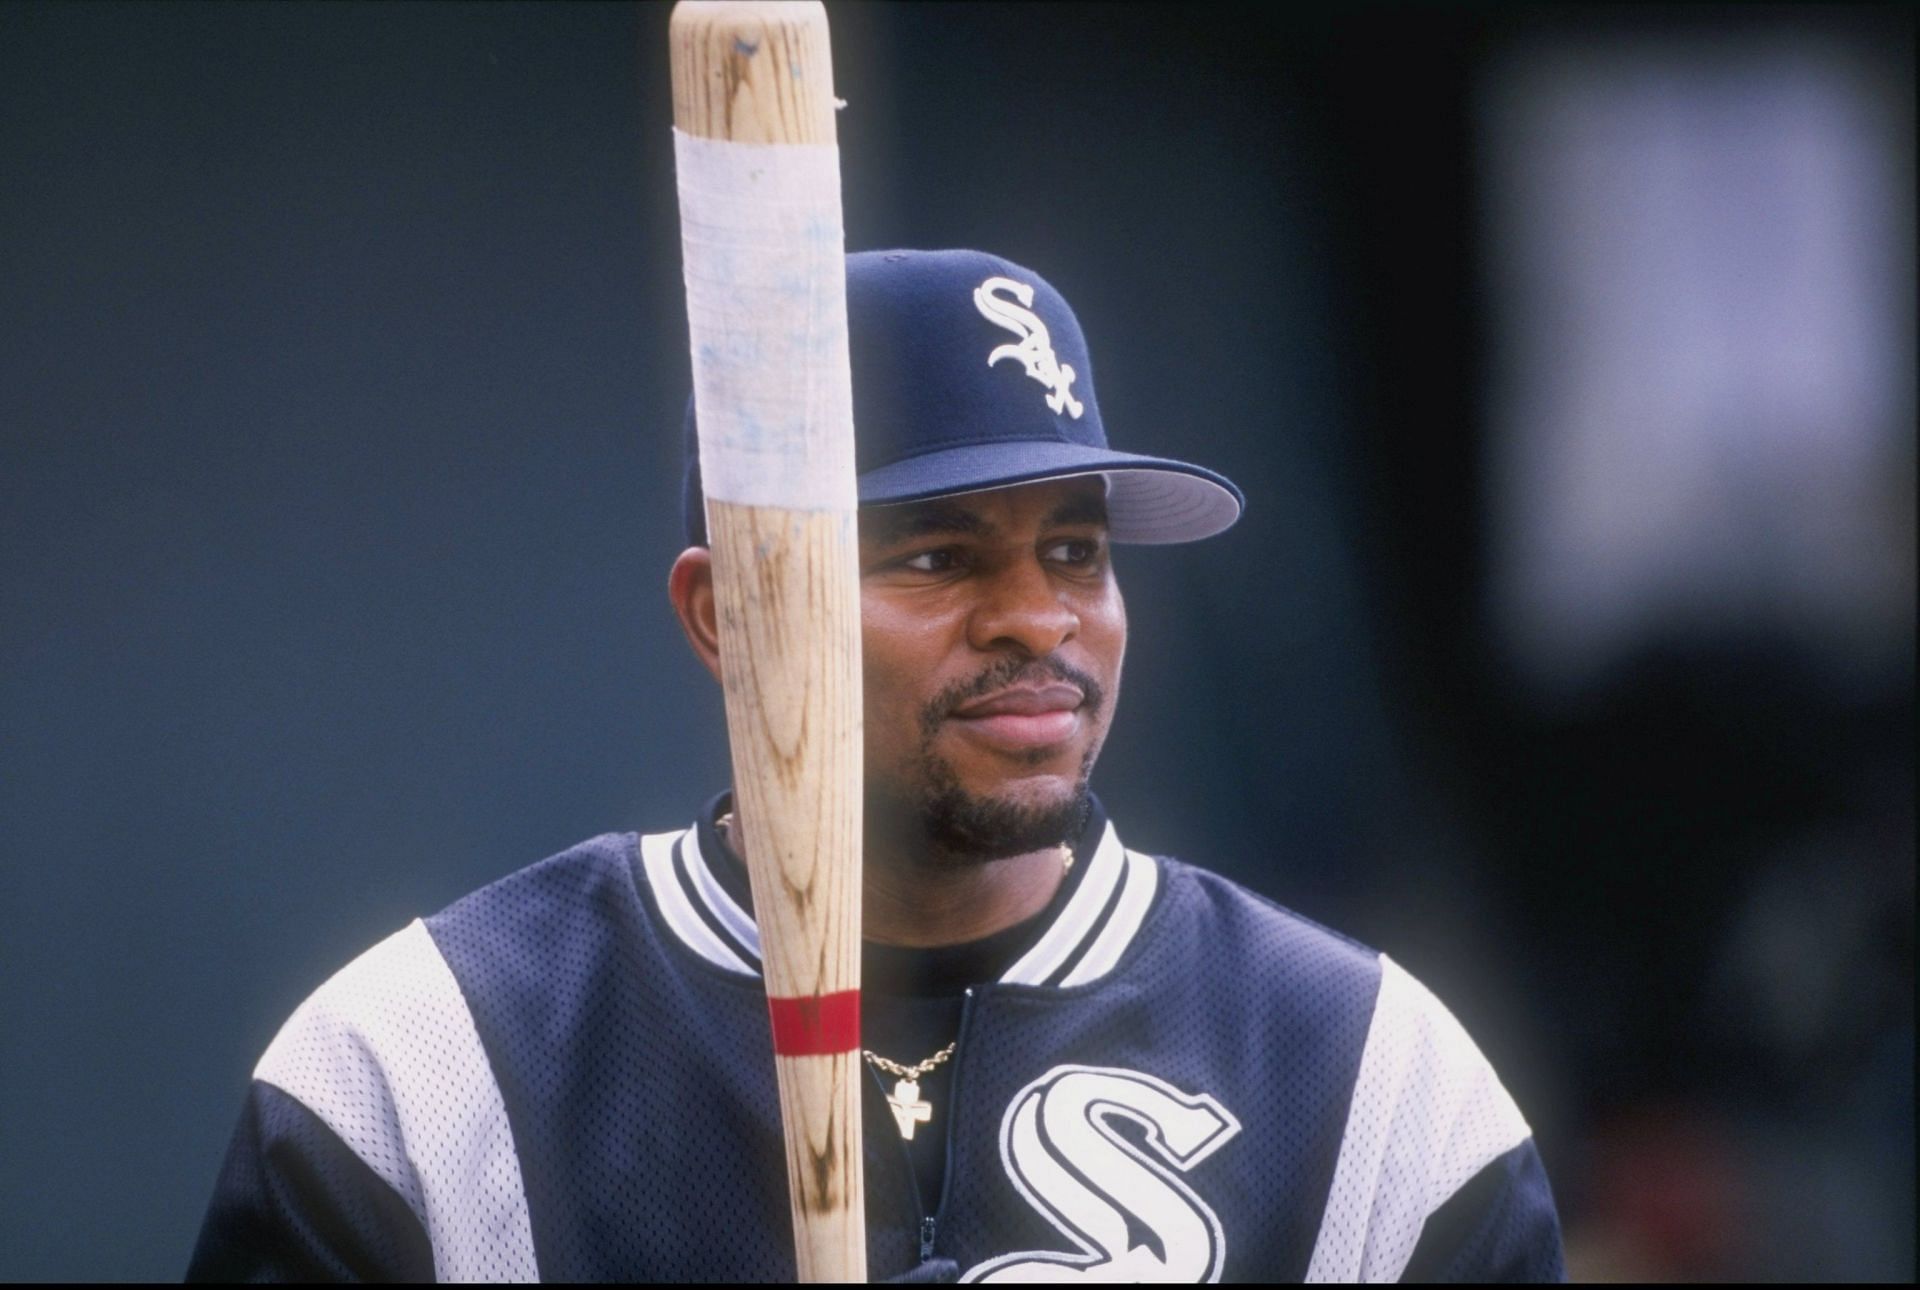 When Cleveland star Albert Belle maintained his innocence after